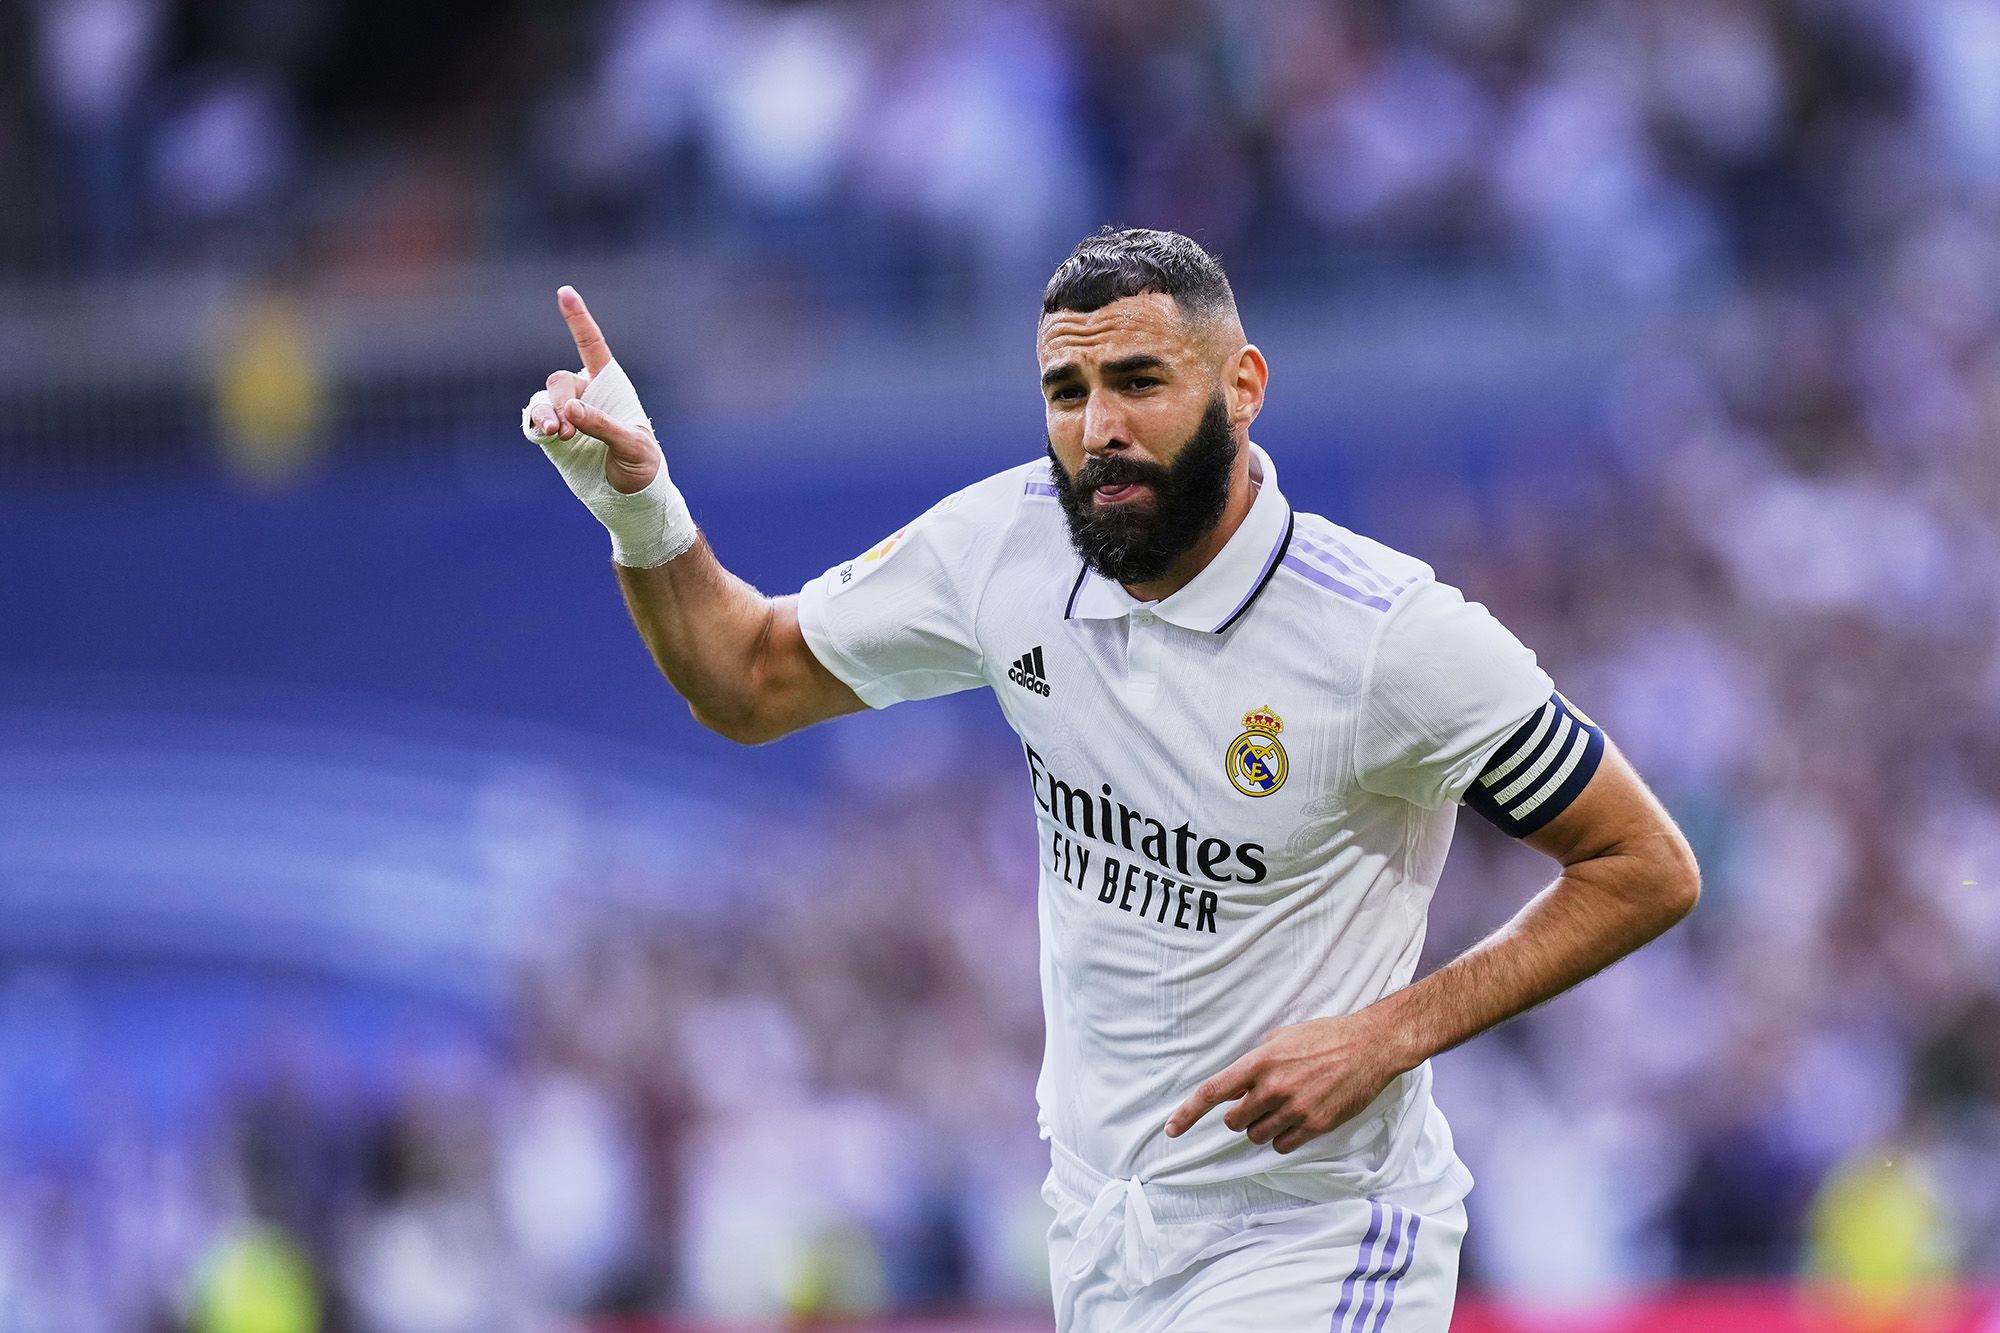 Know whether Karim Benzema will be seen playing in the final for France